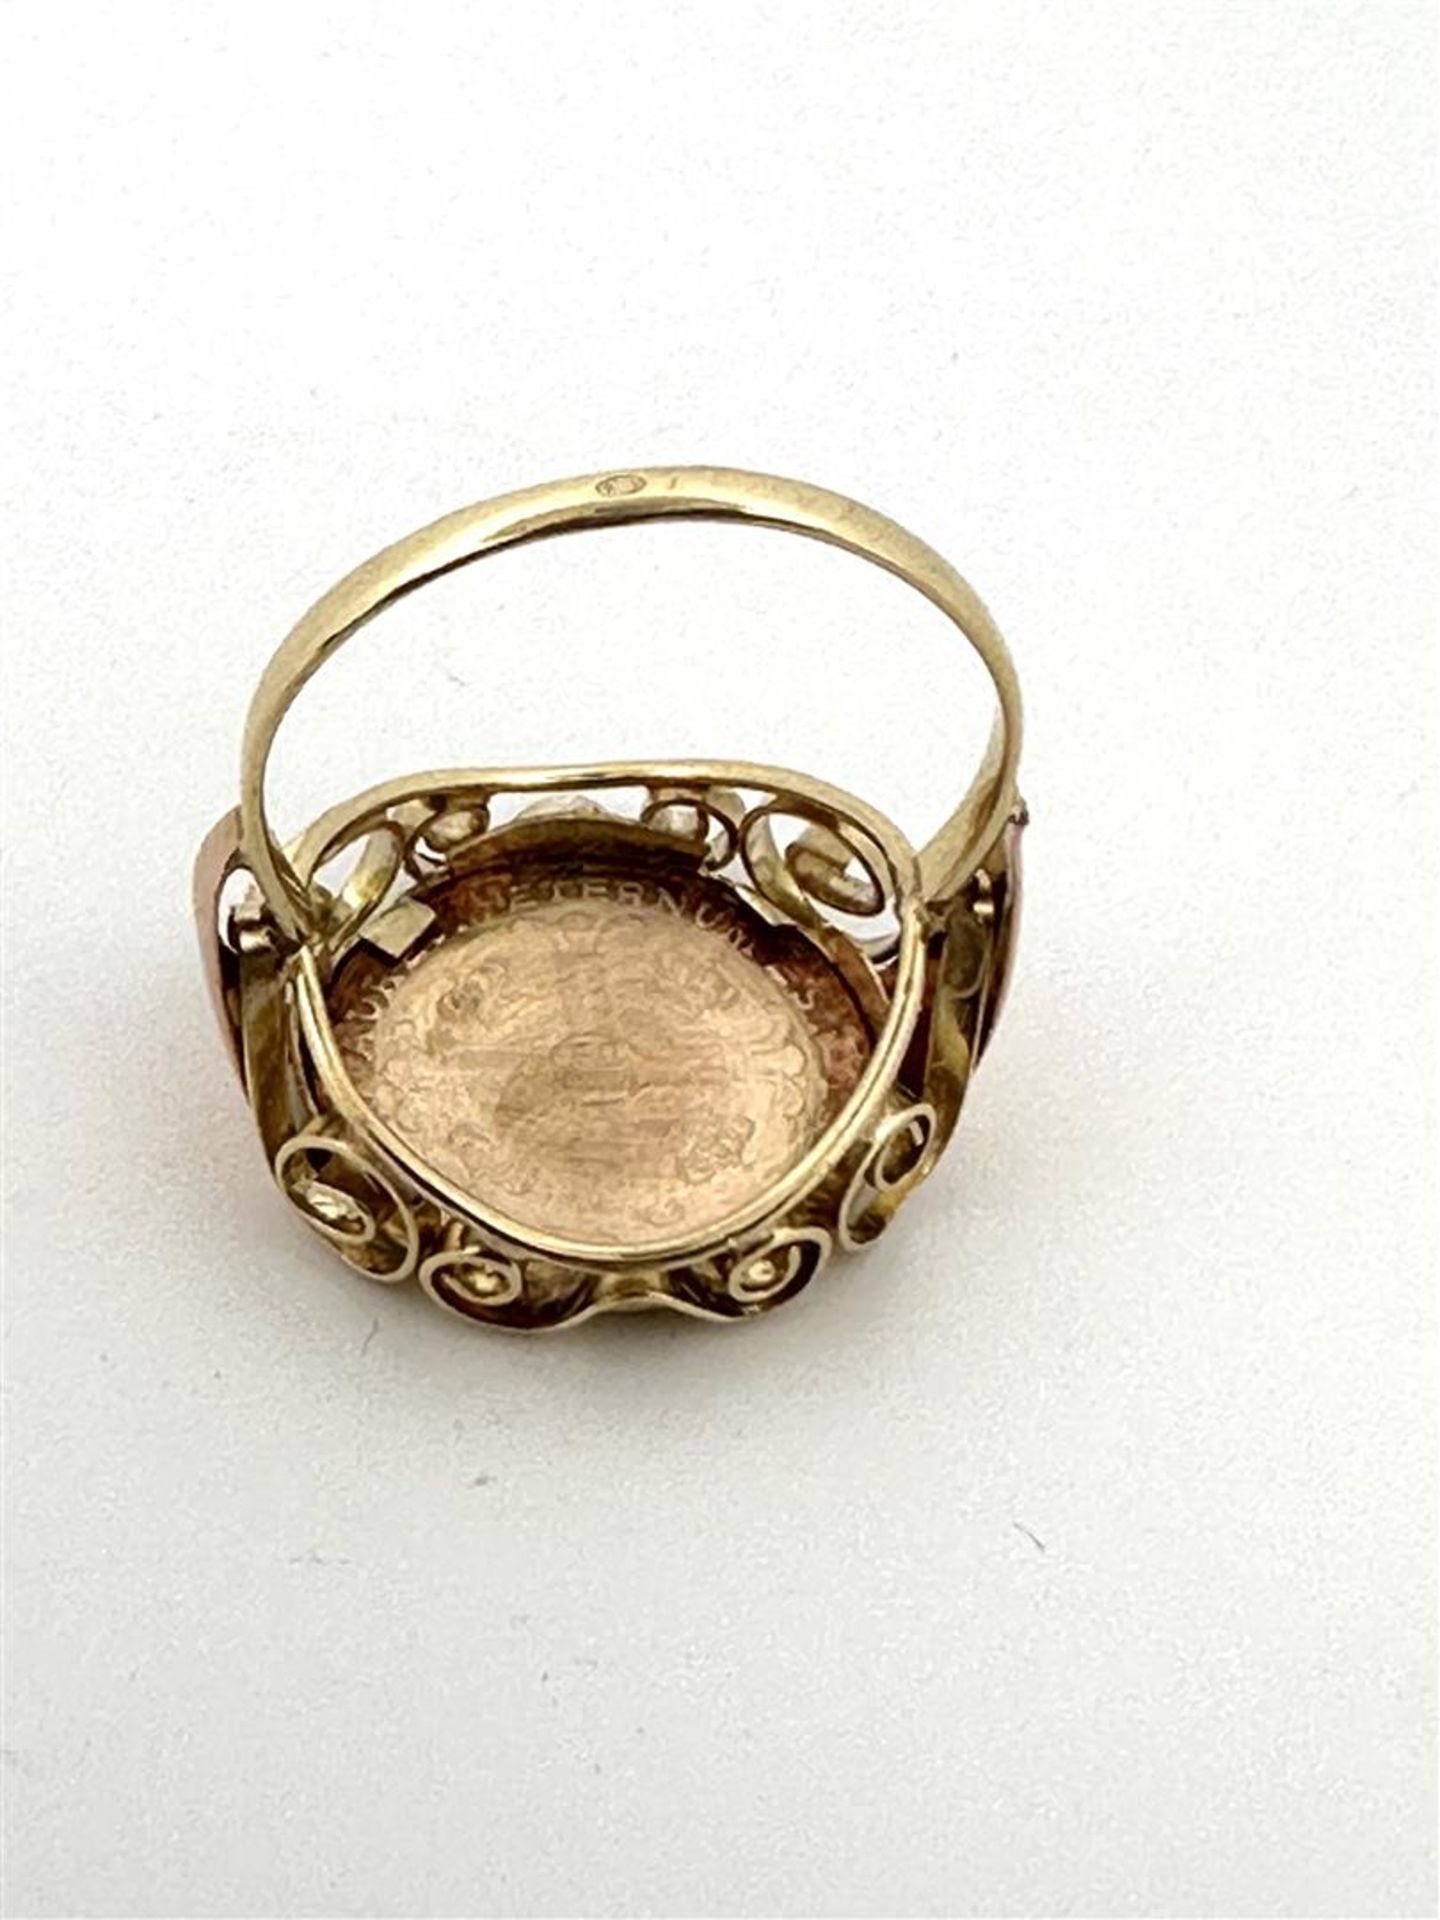 14kt yellow gold American signet ring with coin. 
The coin depicts John Fitzgerald Kennedy. 1961-196 - Image 5 of 5